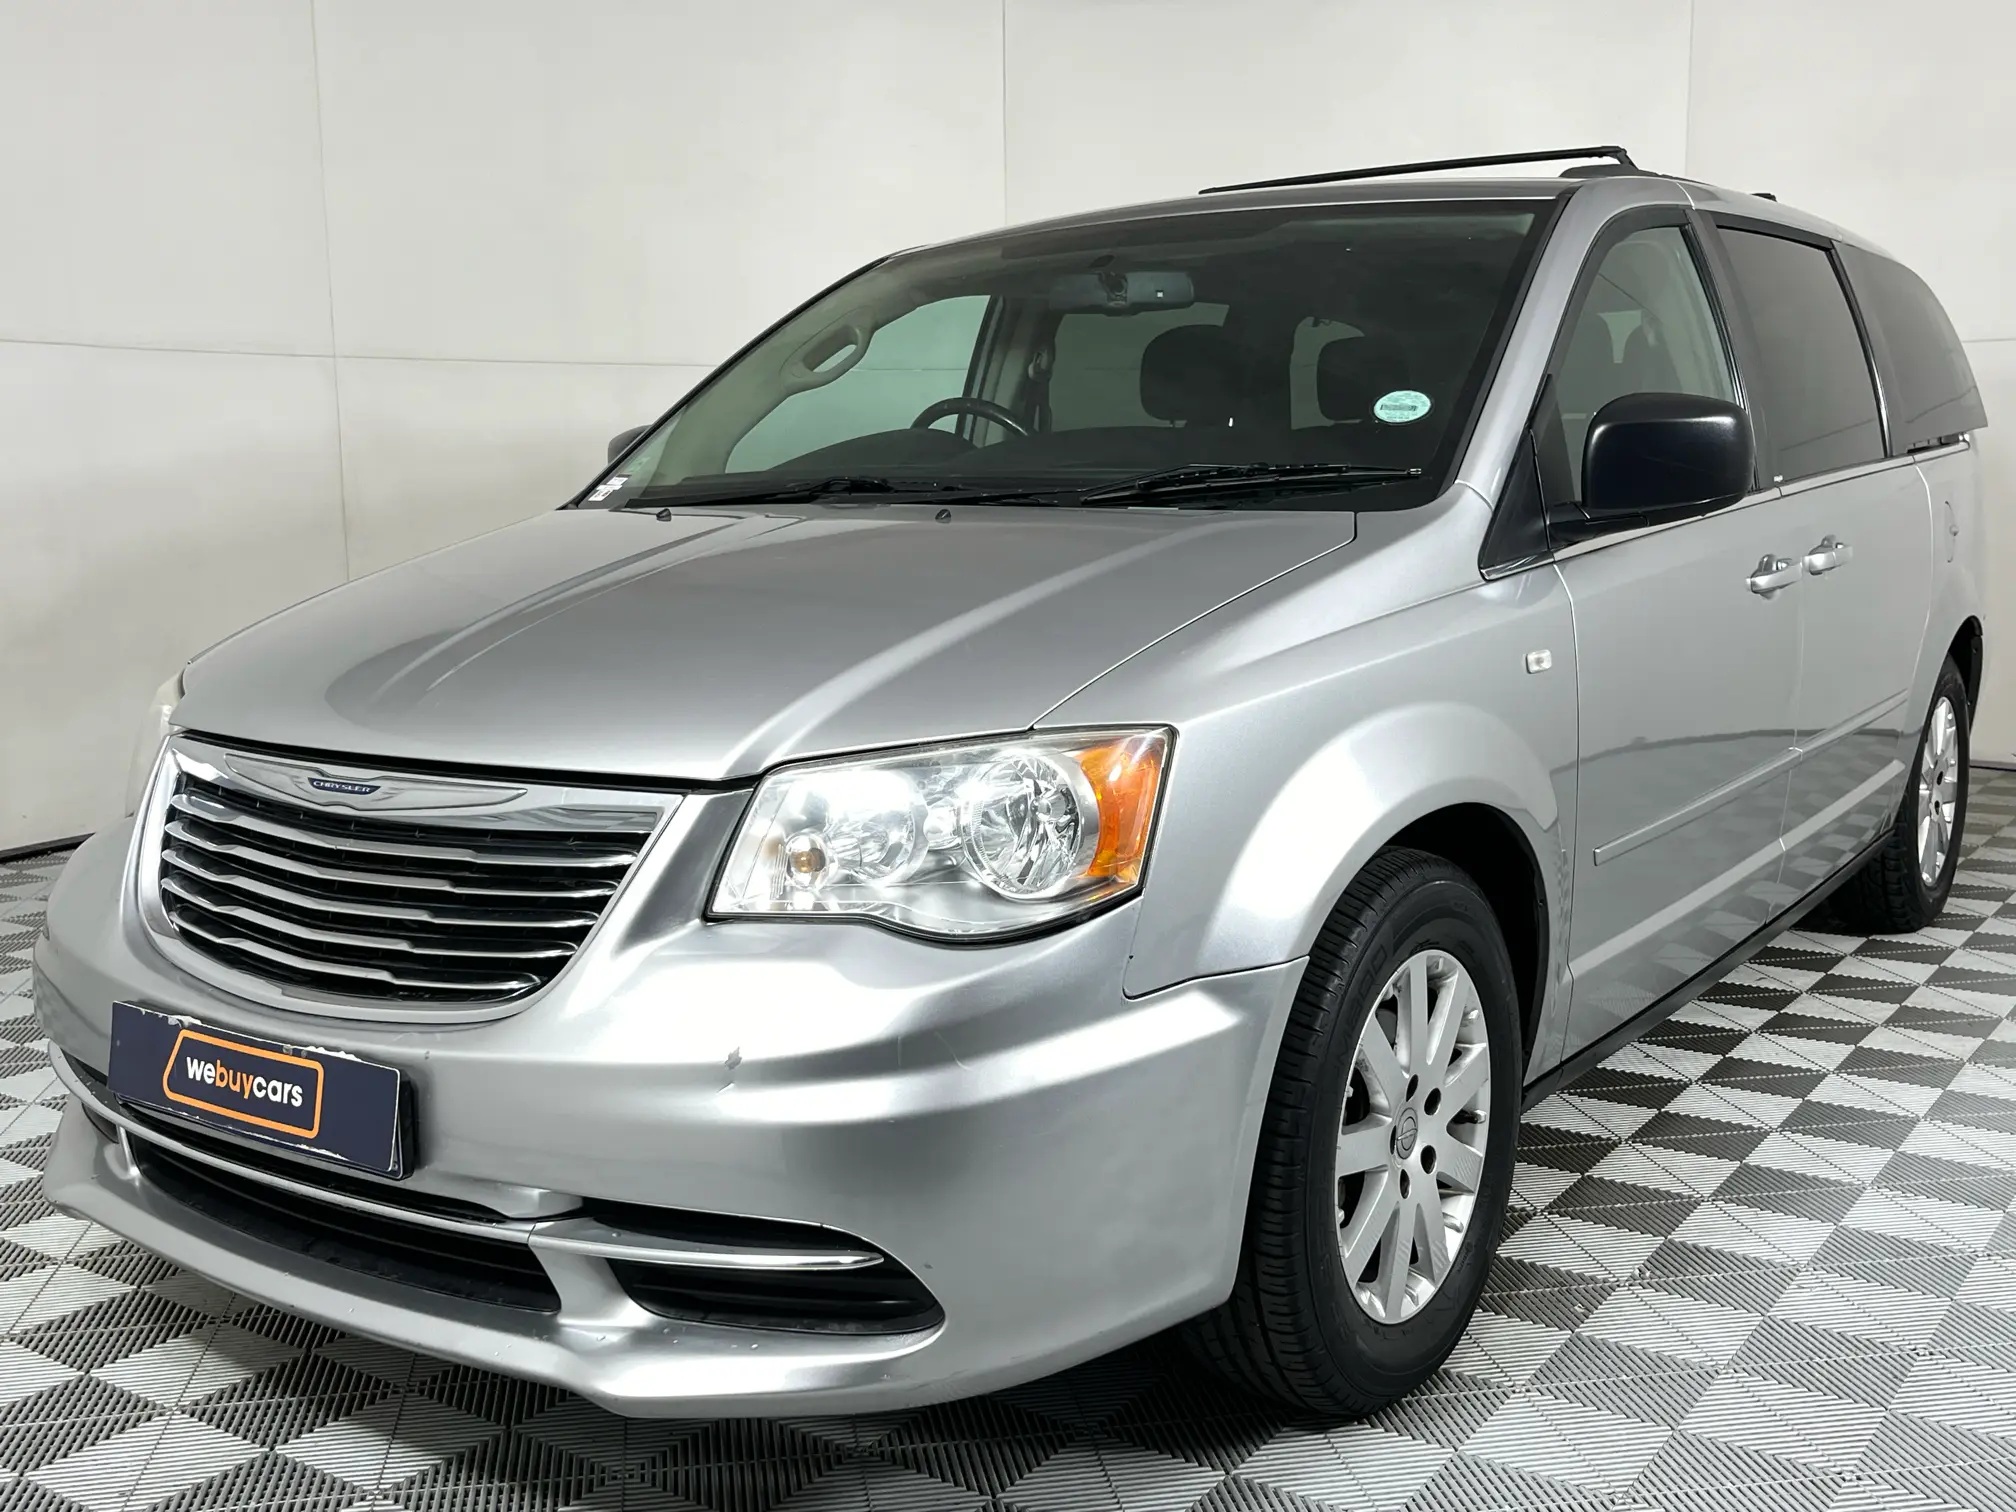 2014 Chrysler Grand Voyager 2.8 Limited Auto